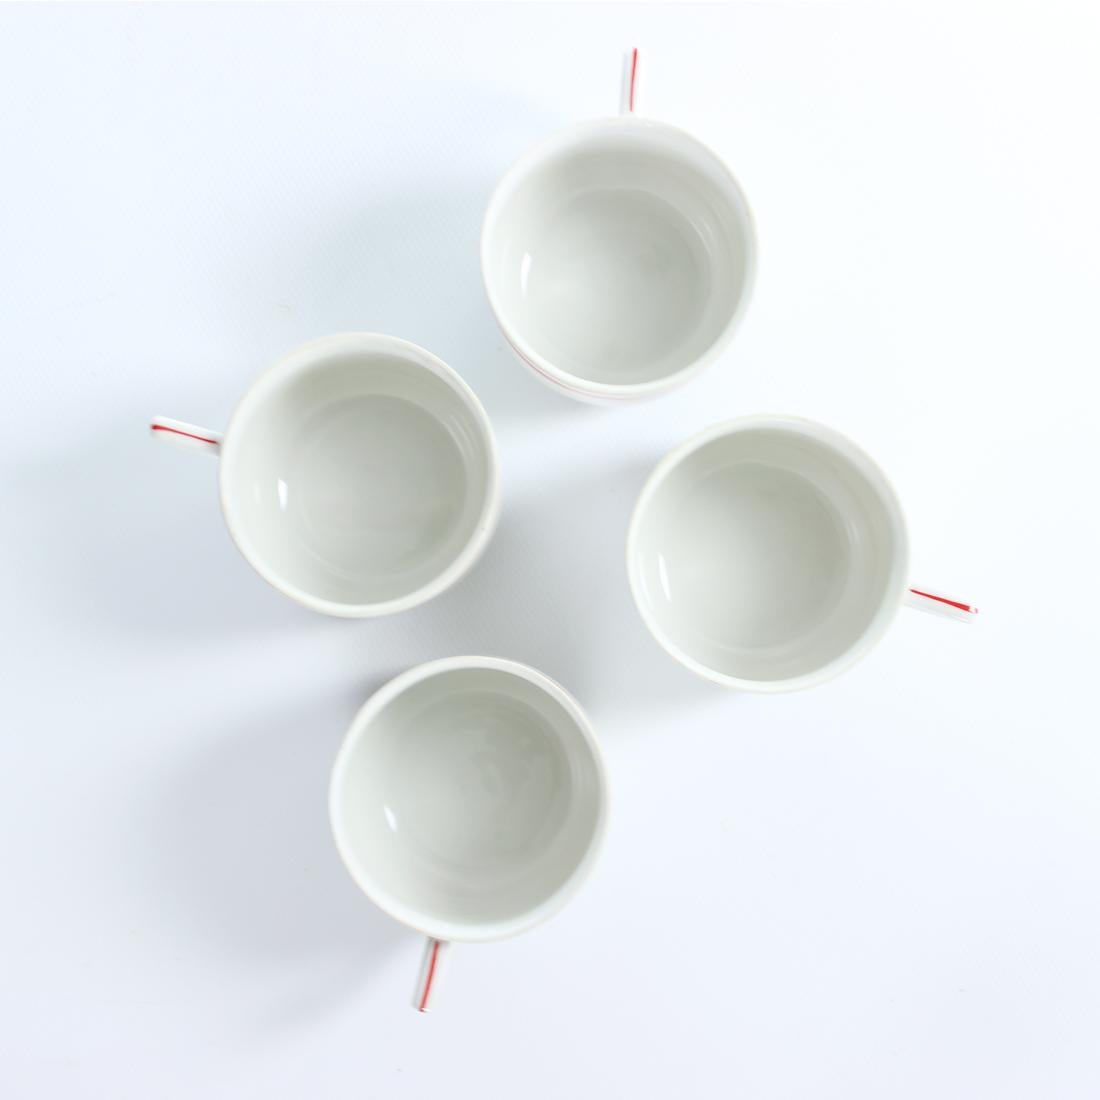 Beautiful set of 4 porcelain tea/coffee cups from Mid-century era. Produced in Czechoslovakia. Original label stamped in the bottom of each cup. The cups are elegant and simple in a beautiful white porcelain with a couple of red stripes around the